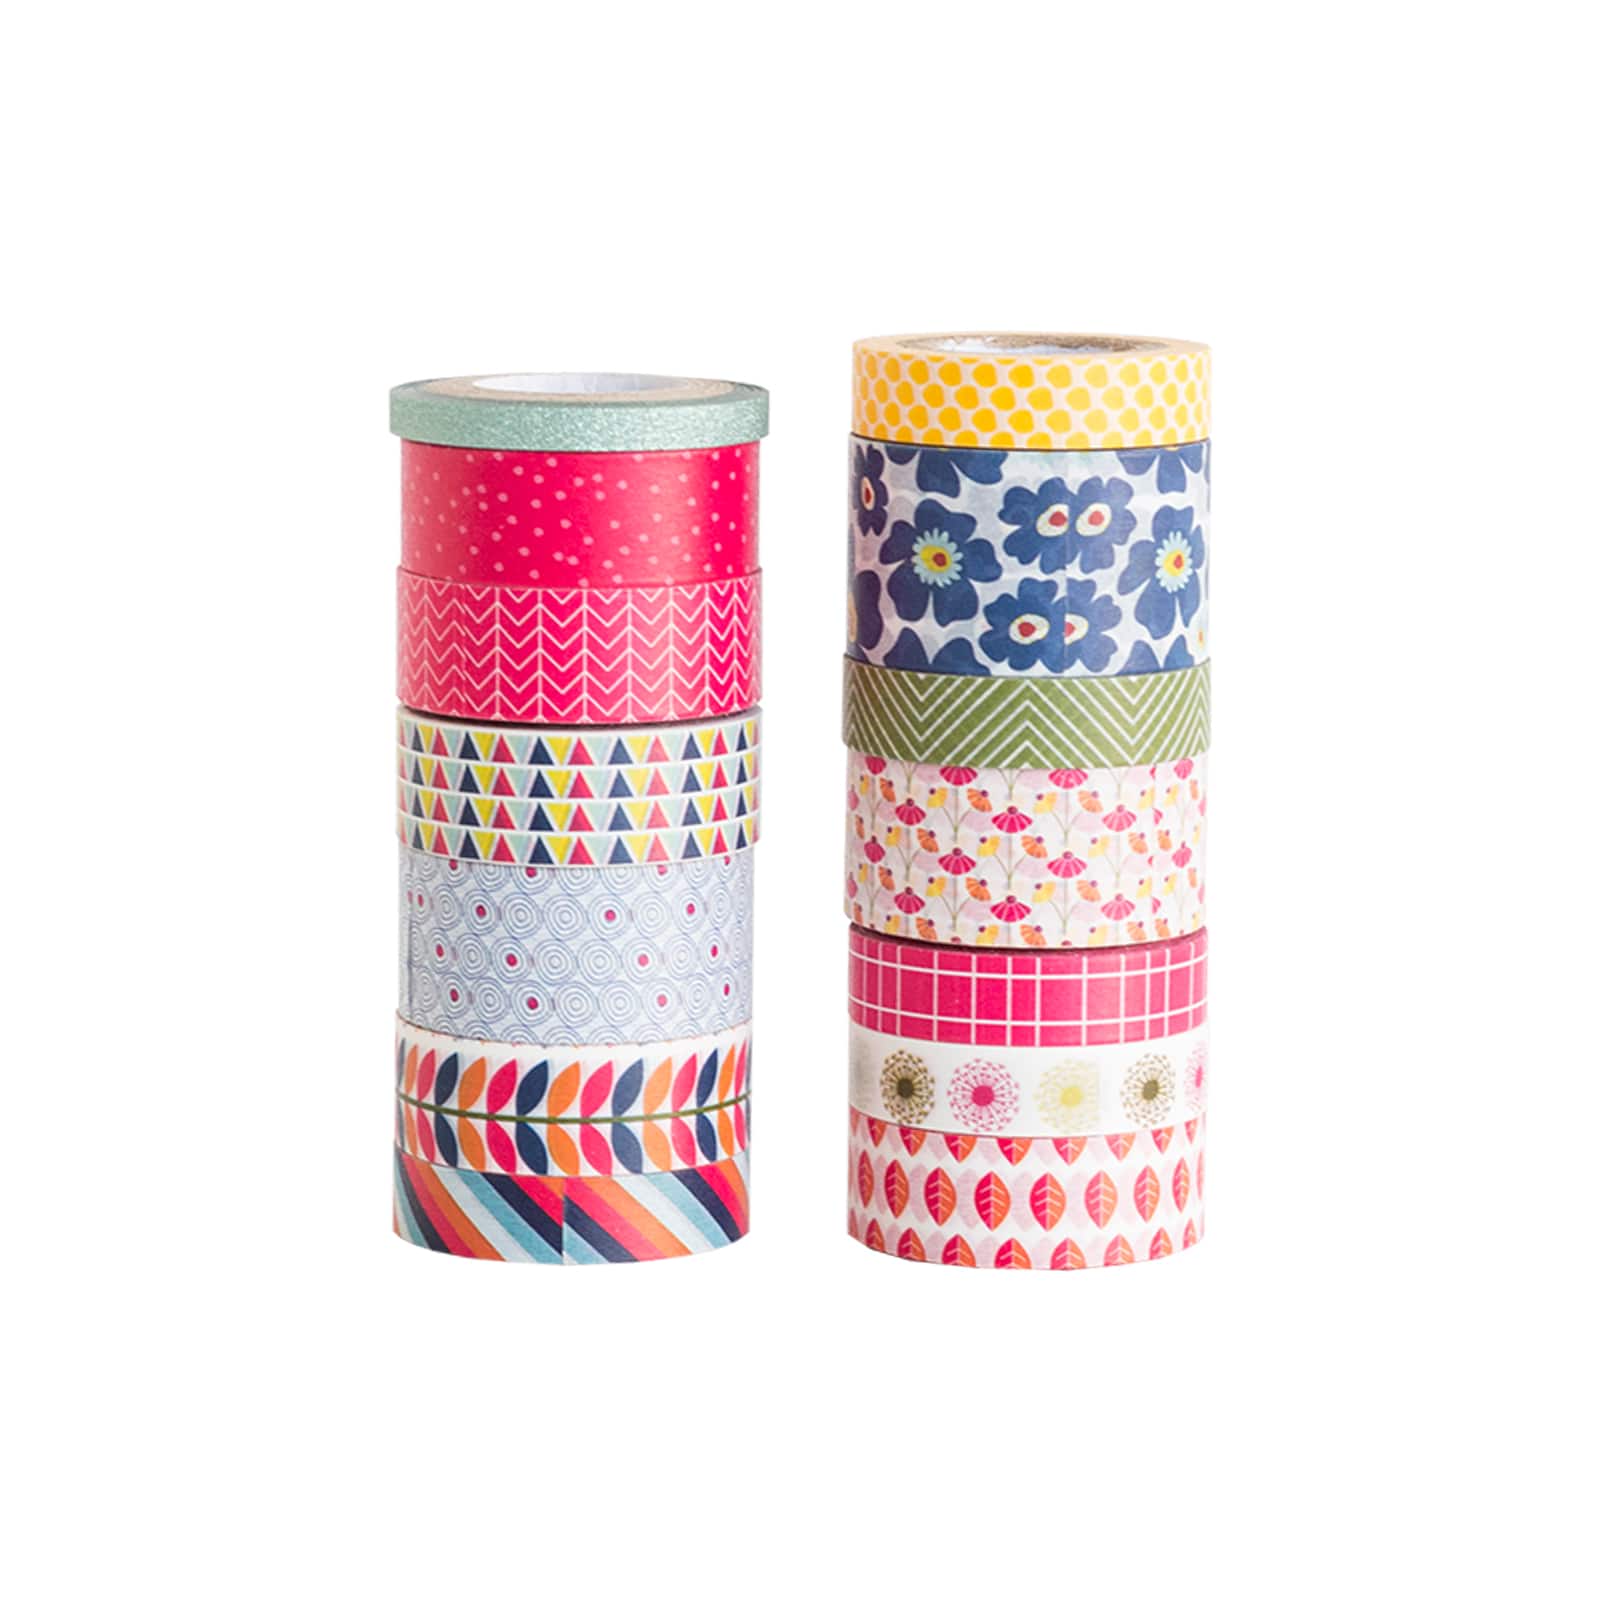 6 Packs: 14 ct. (84 total) Big Bloom Crafting Tape Set by Recollections&#x2122;